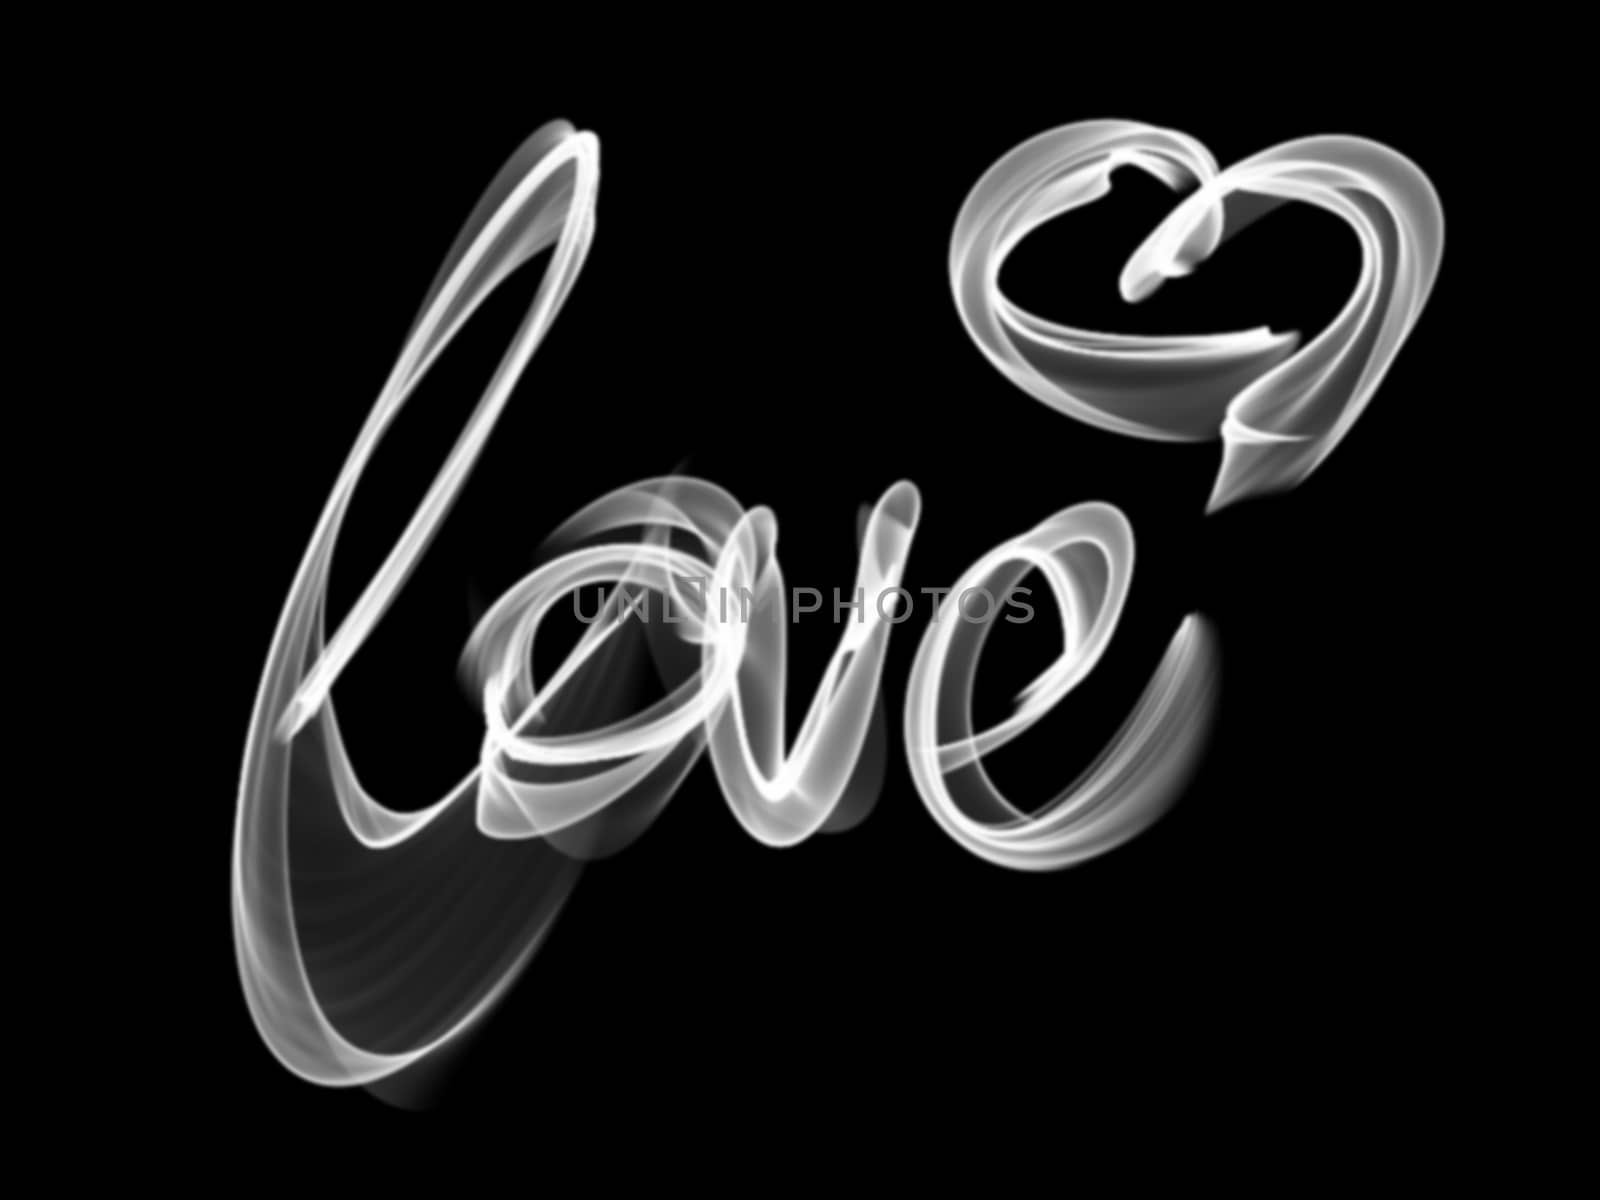 Love isolated word lettering and heart written with fire flame or smoke on black background by skrotov